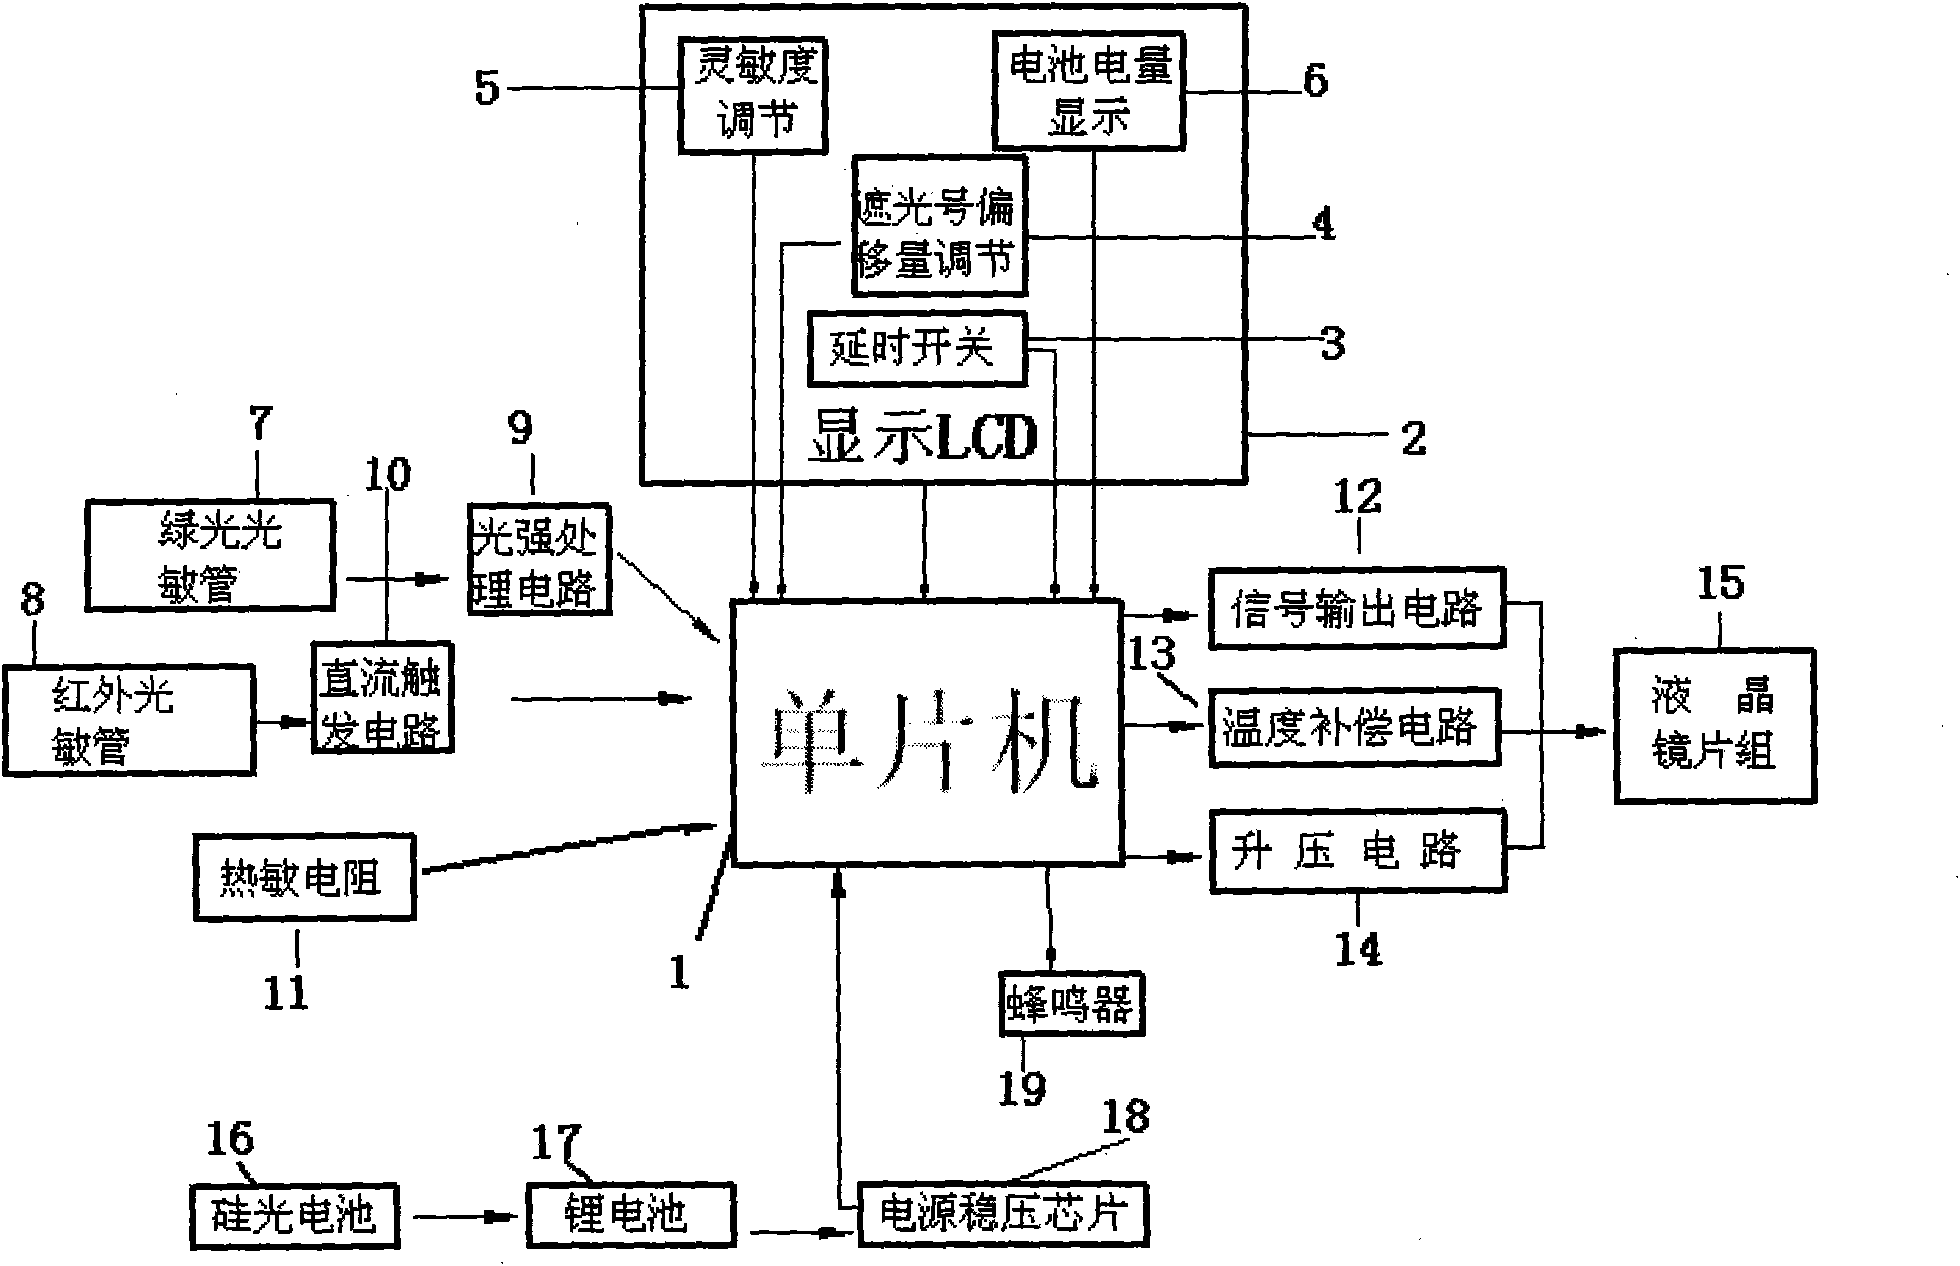 Auto-darkening welding filter capable of automatically setting shade number